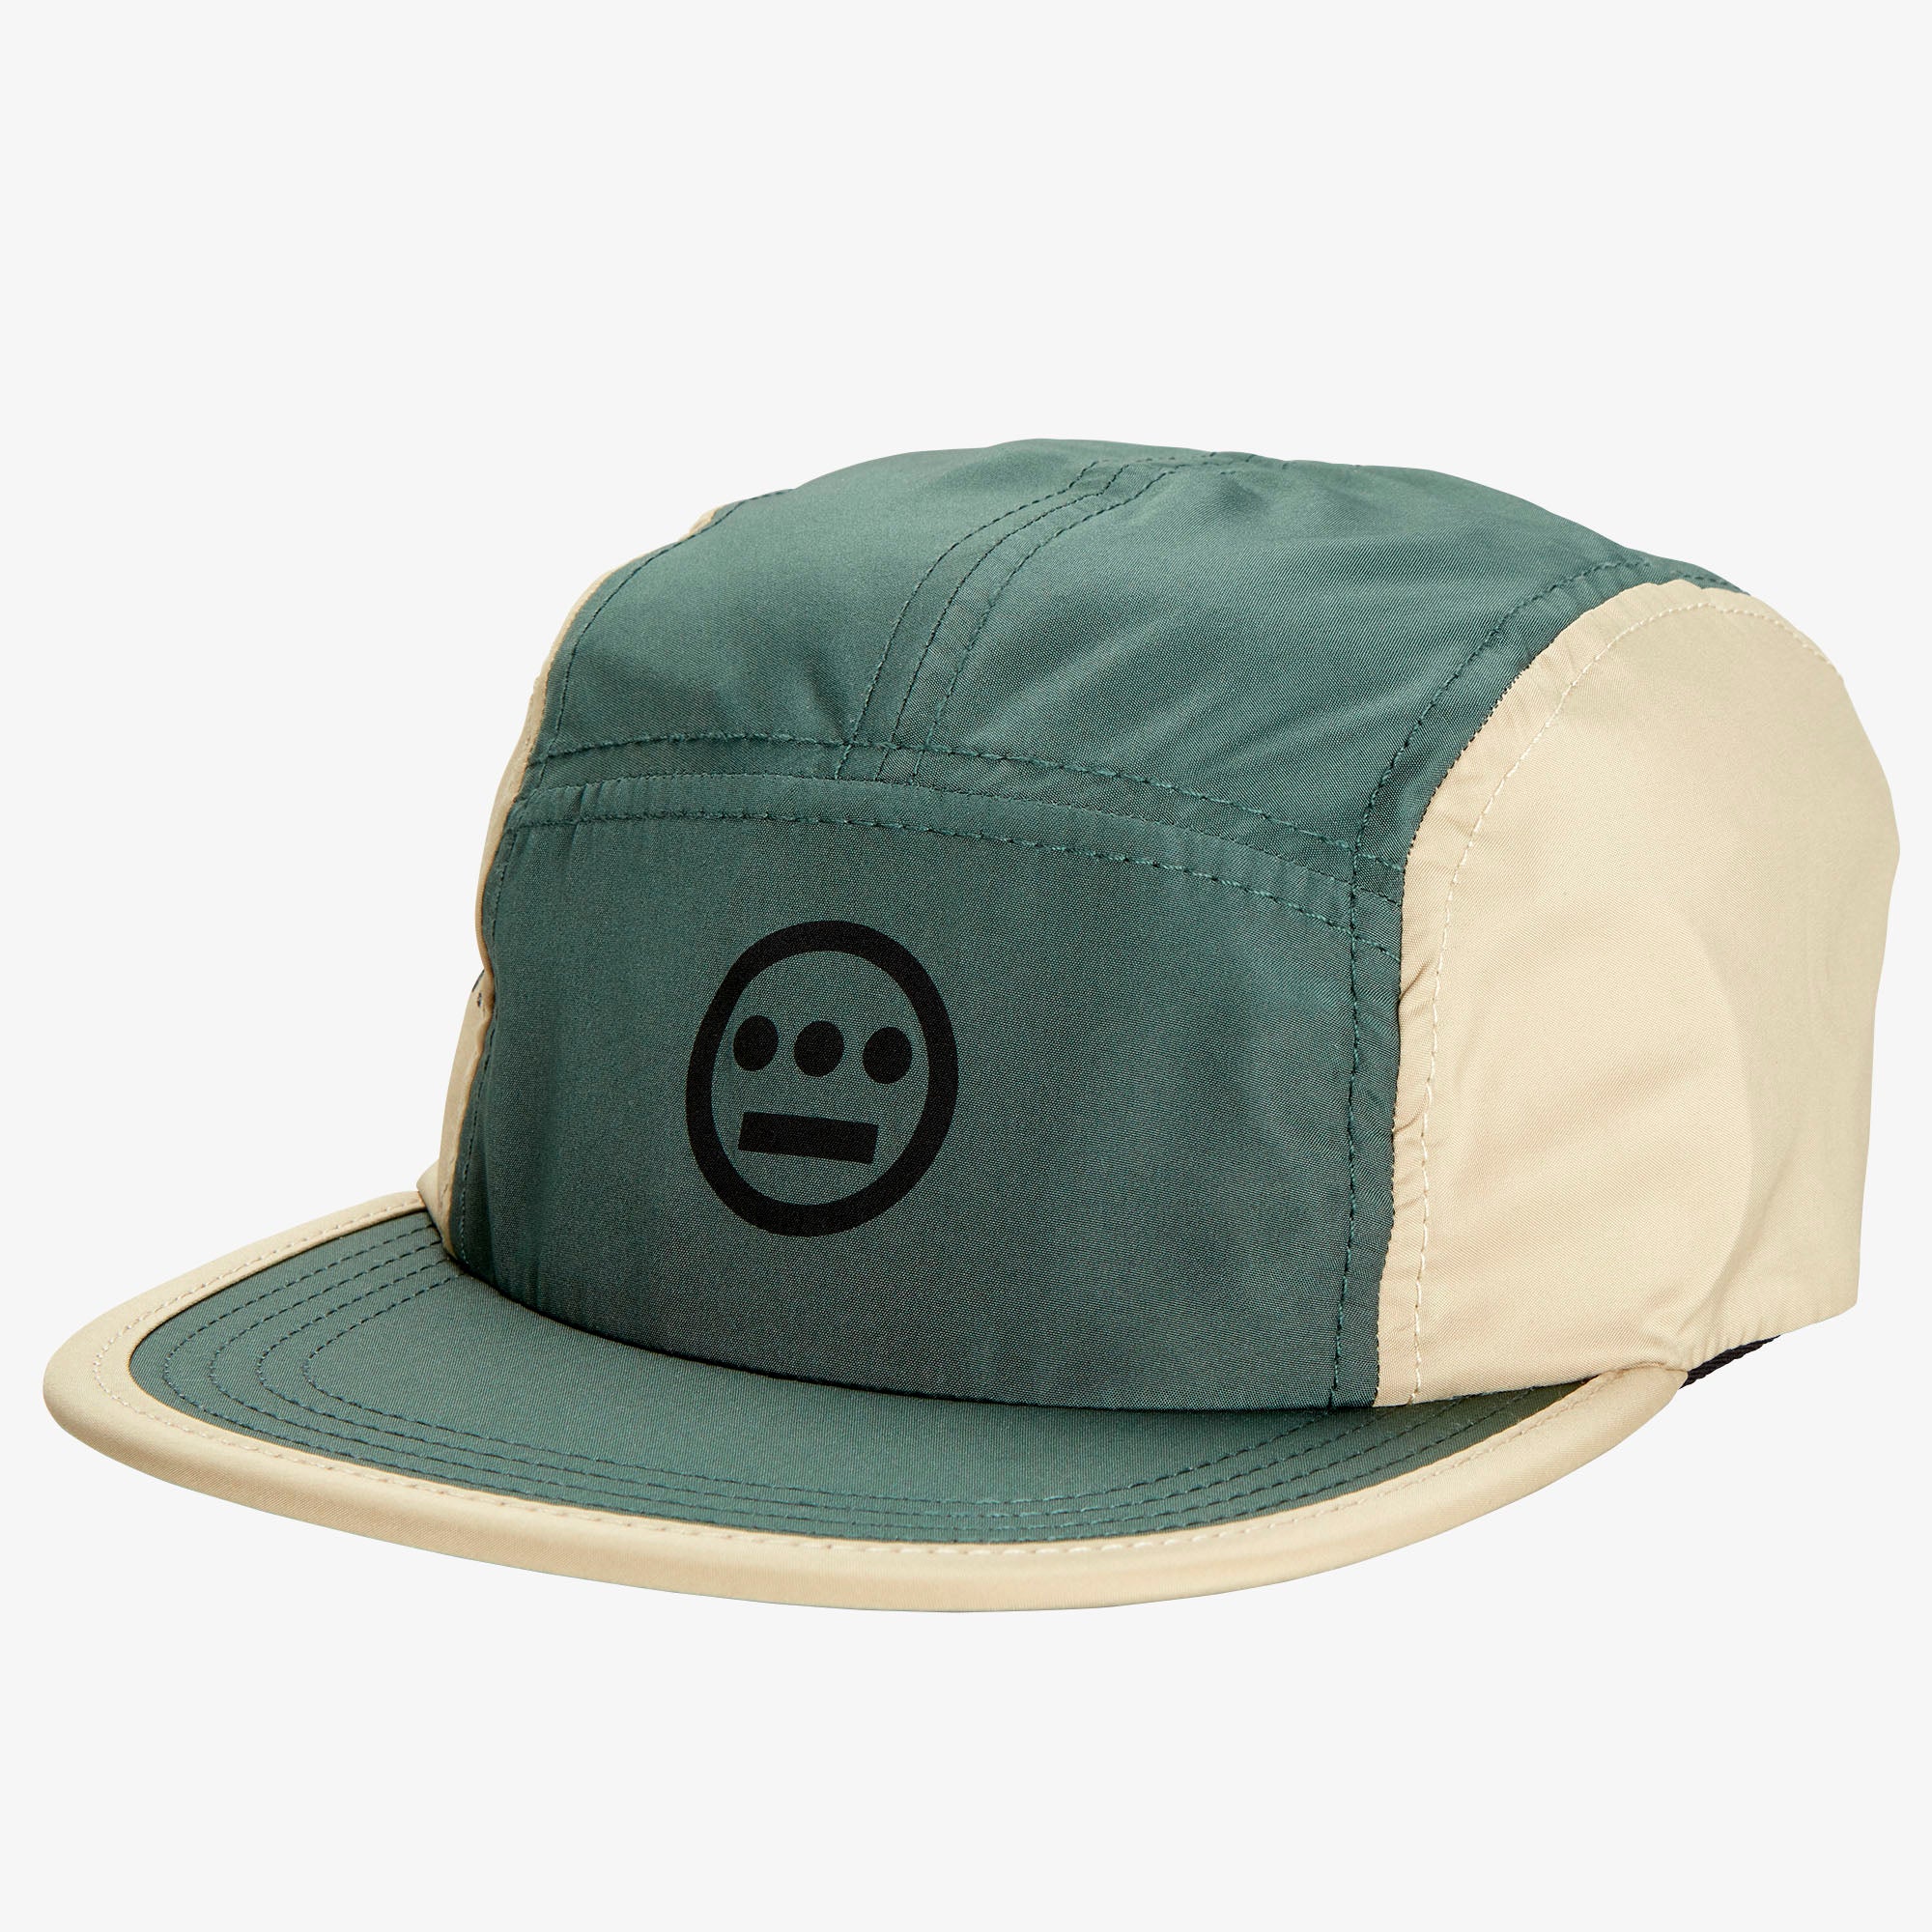 Baseball cap with olive green crown and khaki sides with black Hieroglyphics logo on crown.